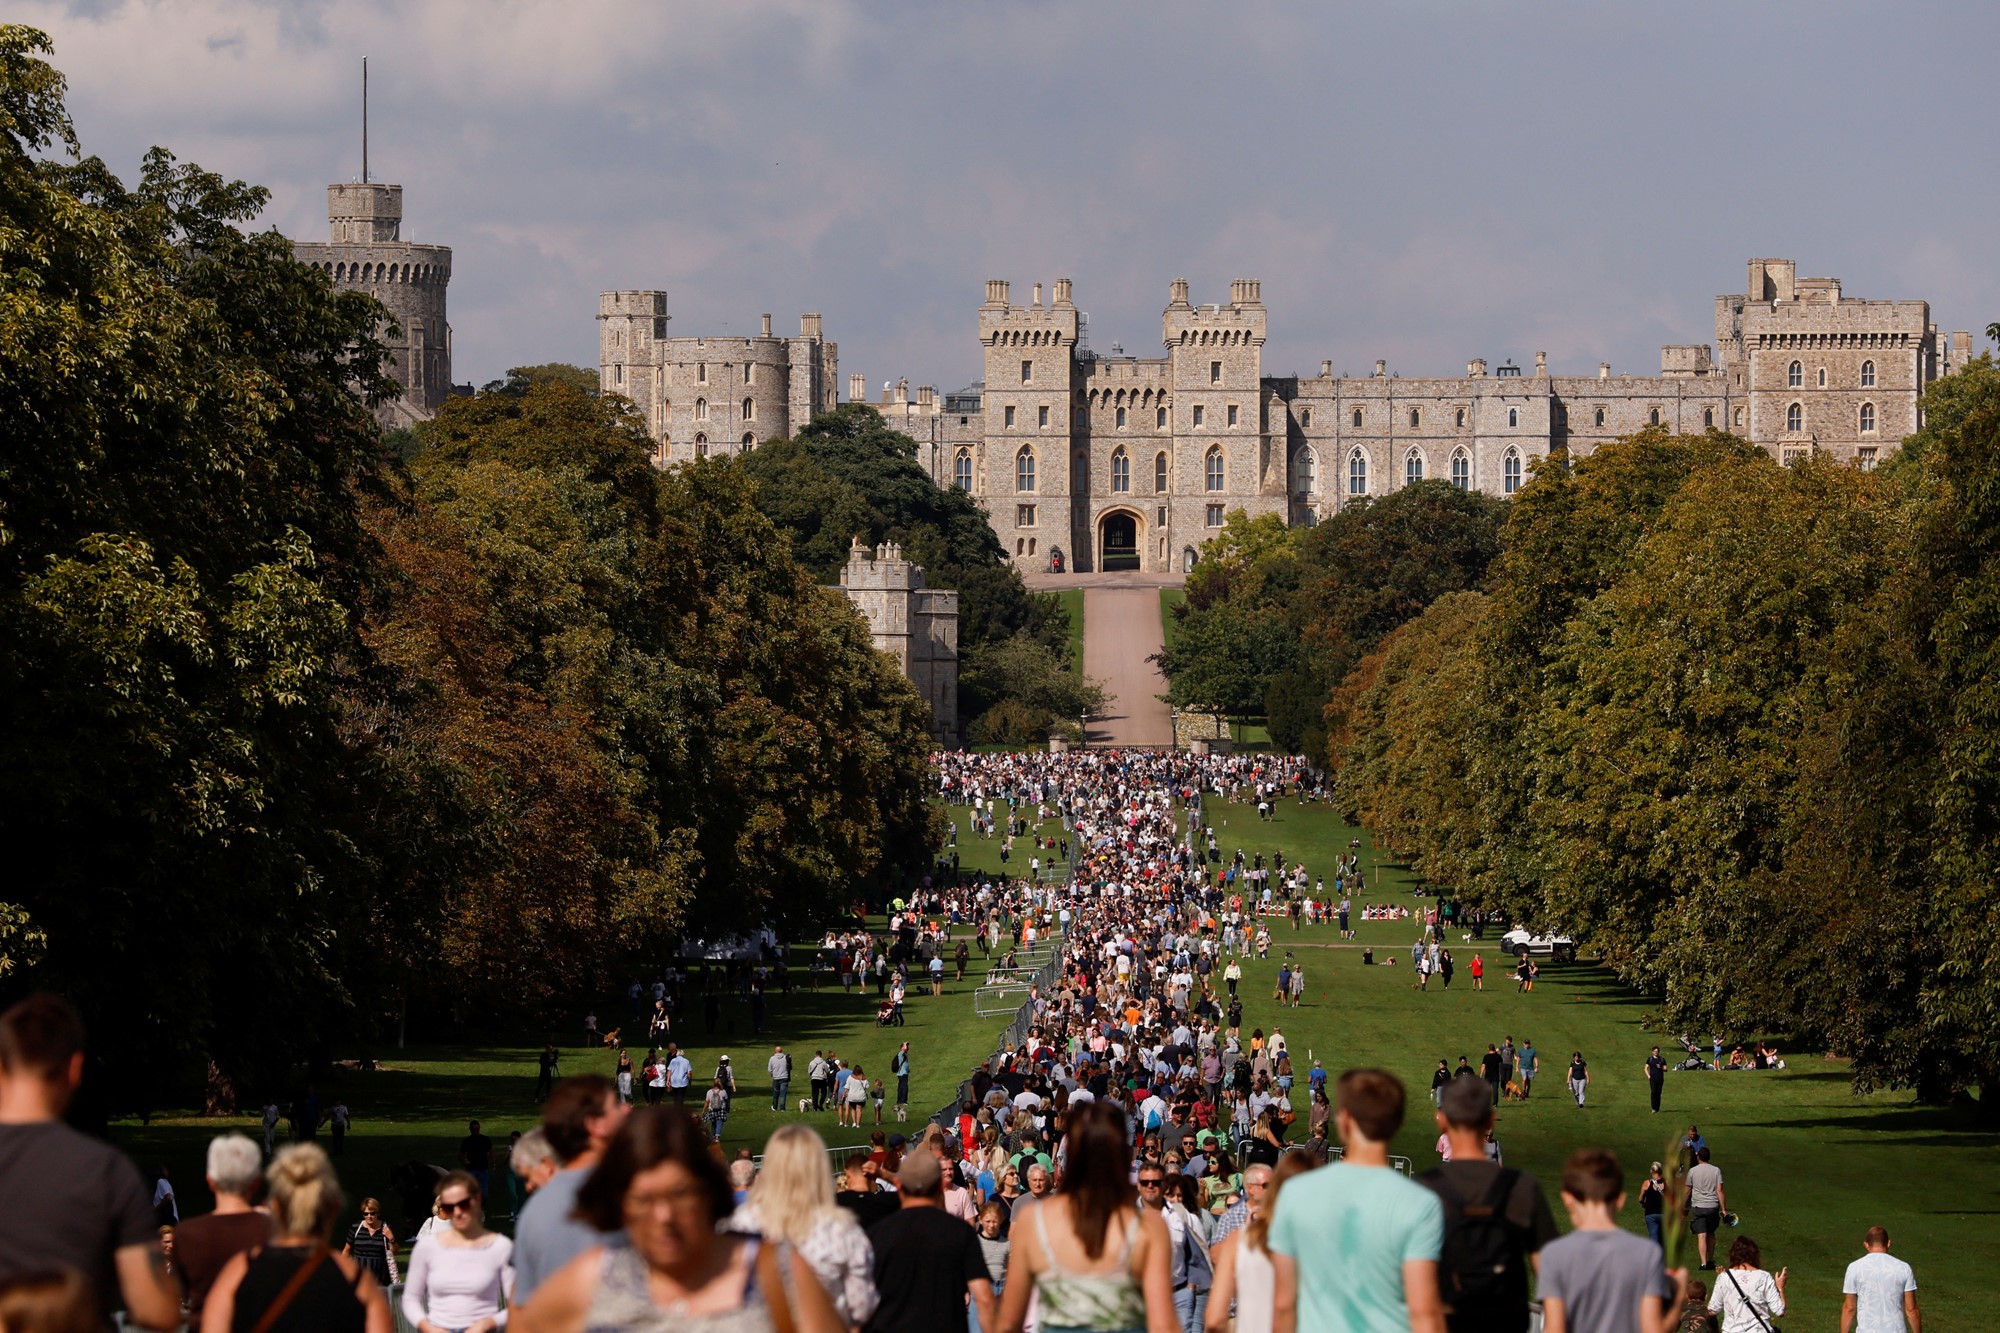 Windsor Castle is pictured, with trees and grass in front of it, where large crowds have gathered.